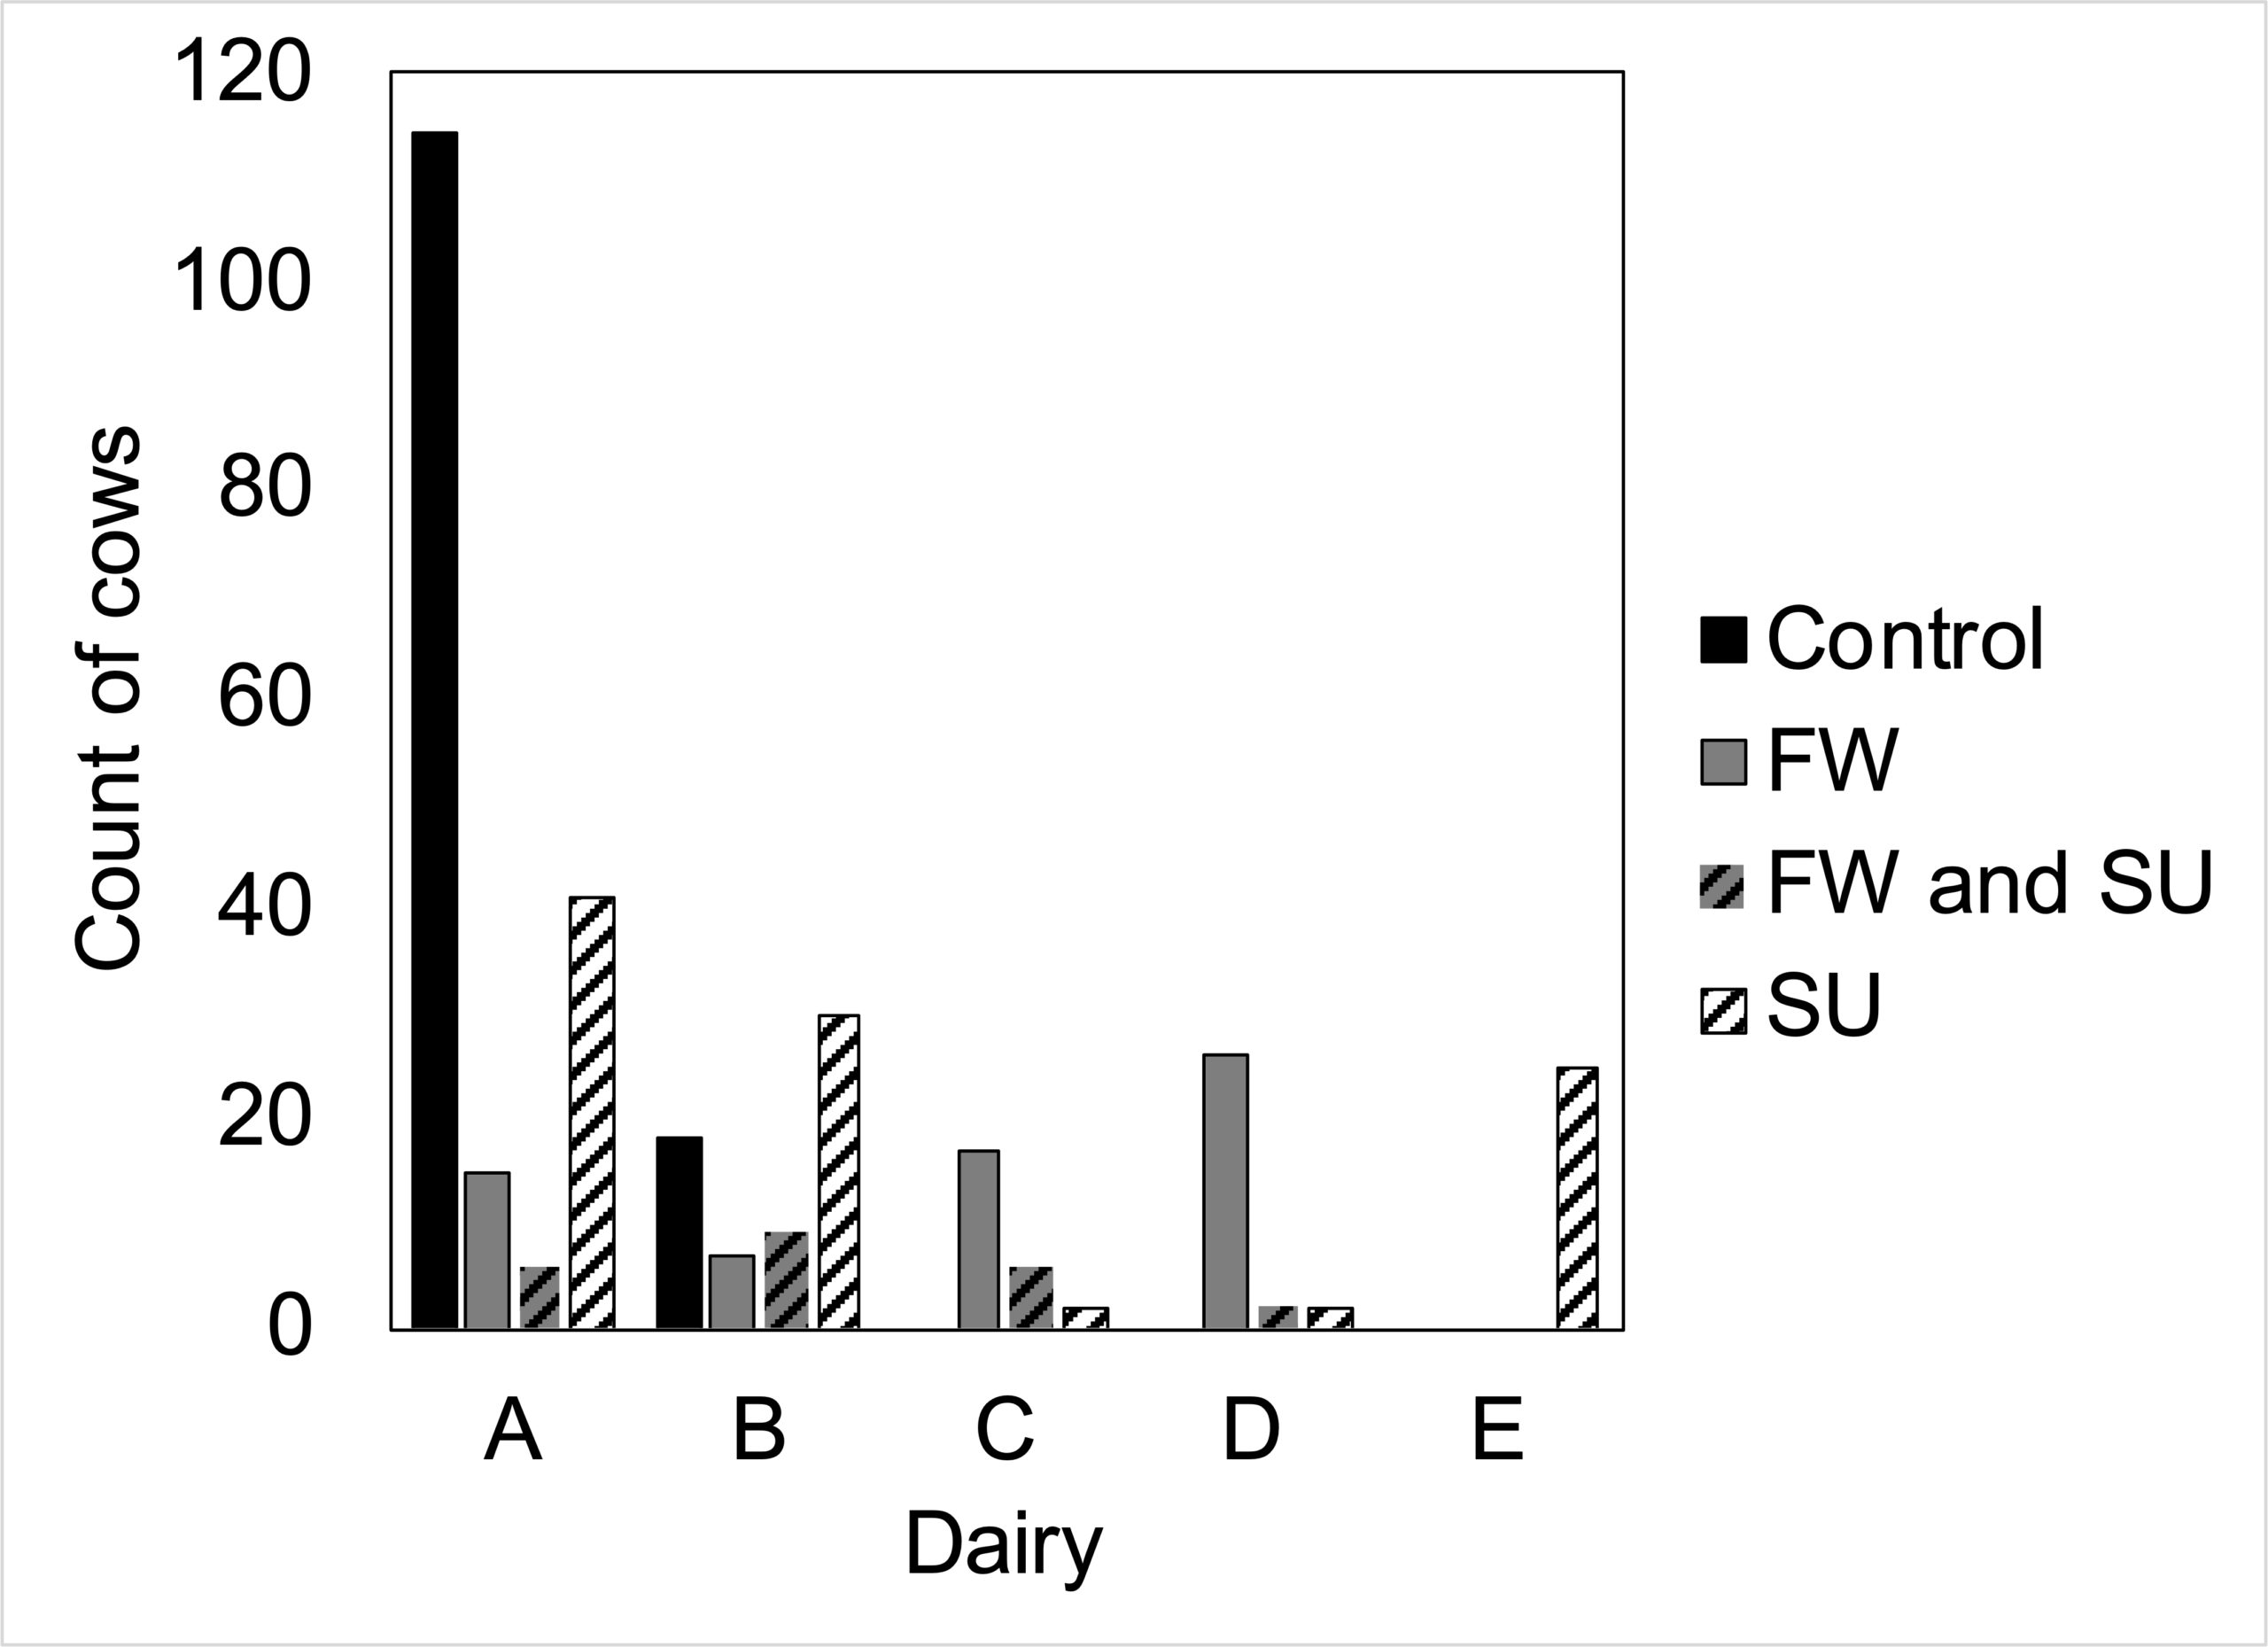 Bar chart displaying the count of cows and the